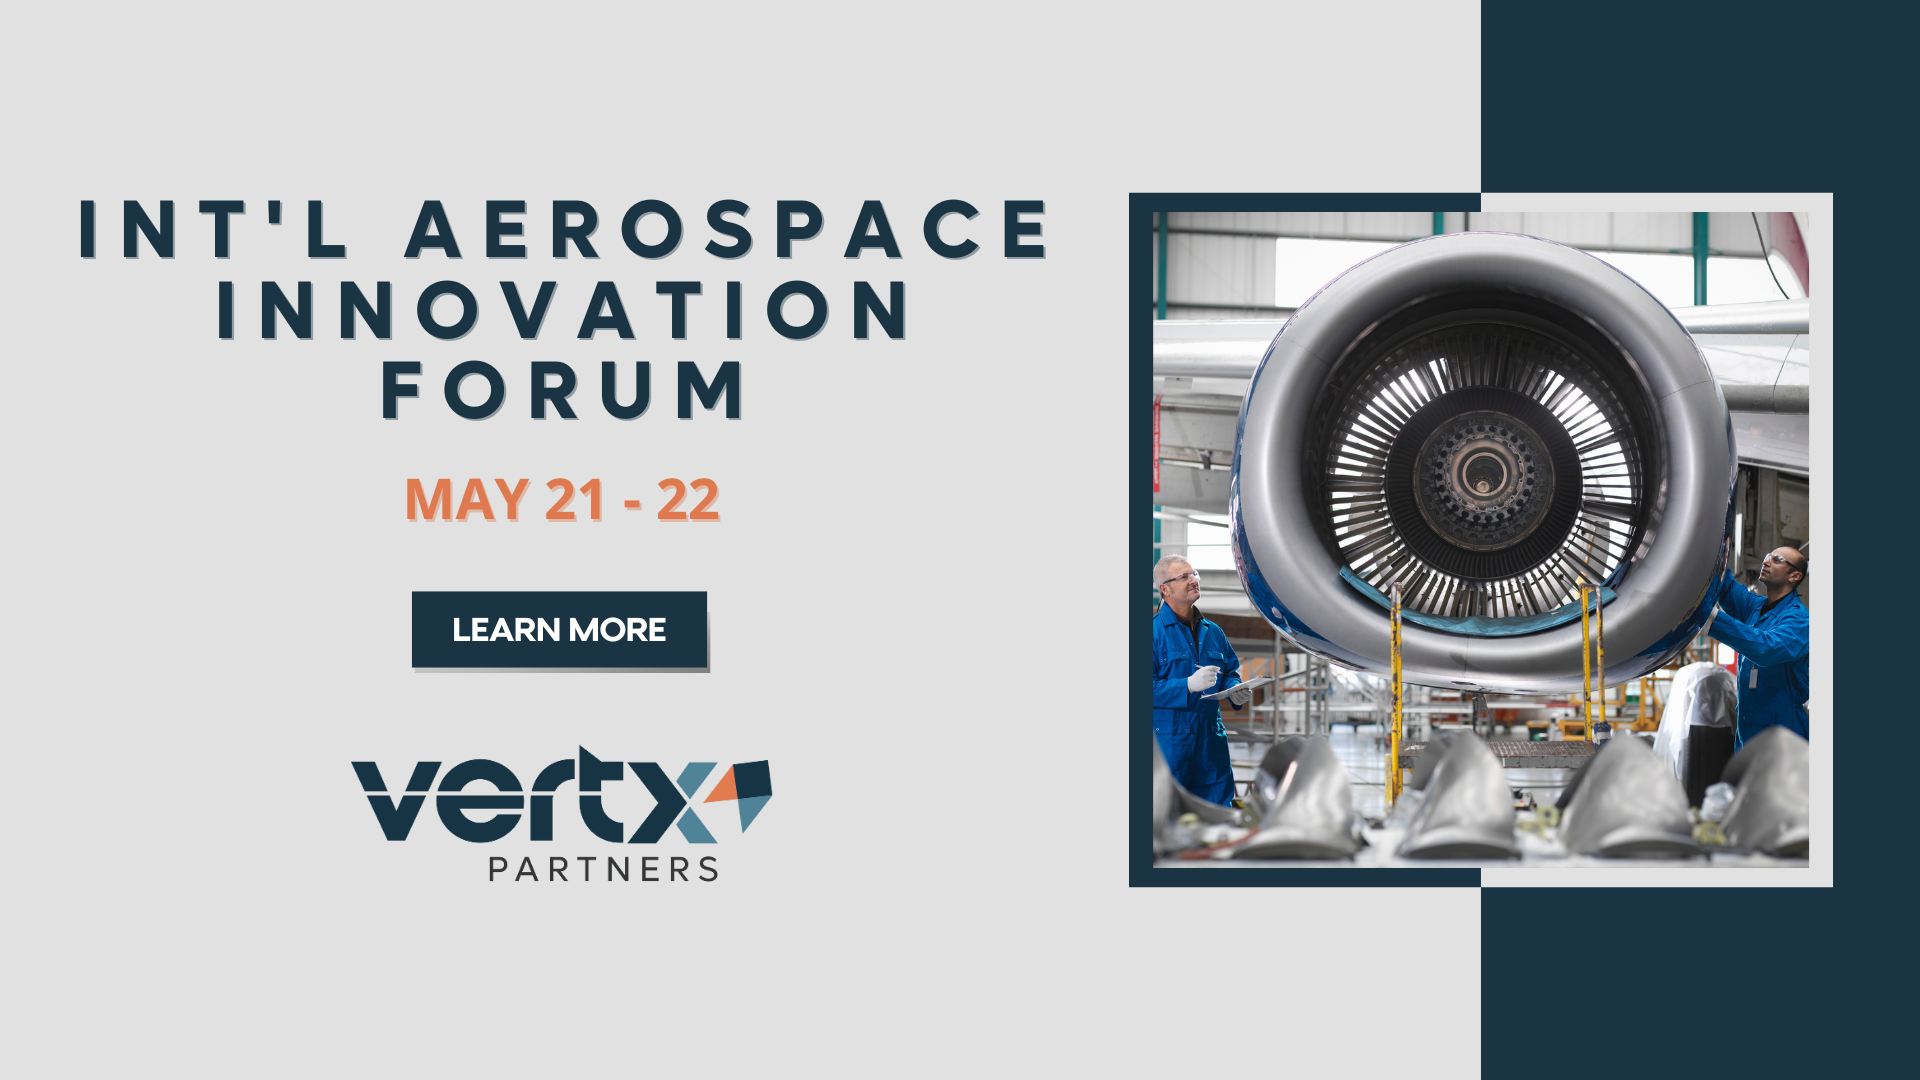 This graphic has the title Int'l Aerospace Innovation Forum with the date may 21-22 on it and a photo of a plane engine to the right of the title and date.